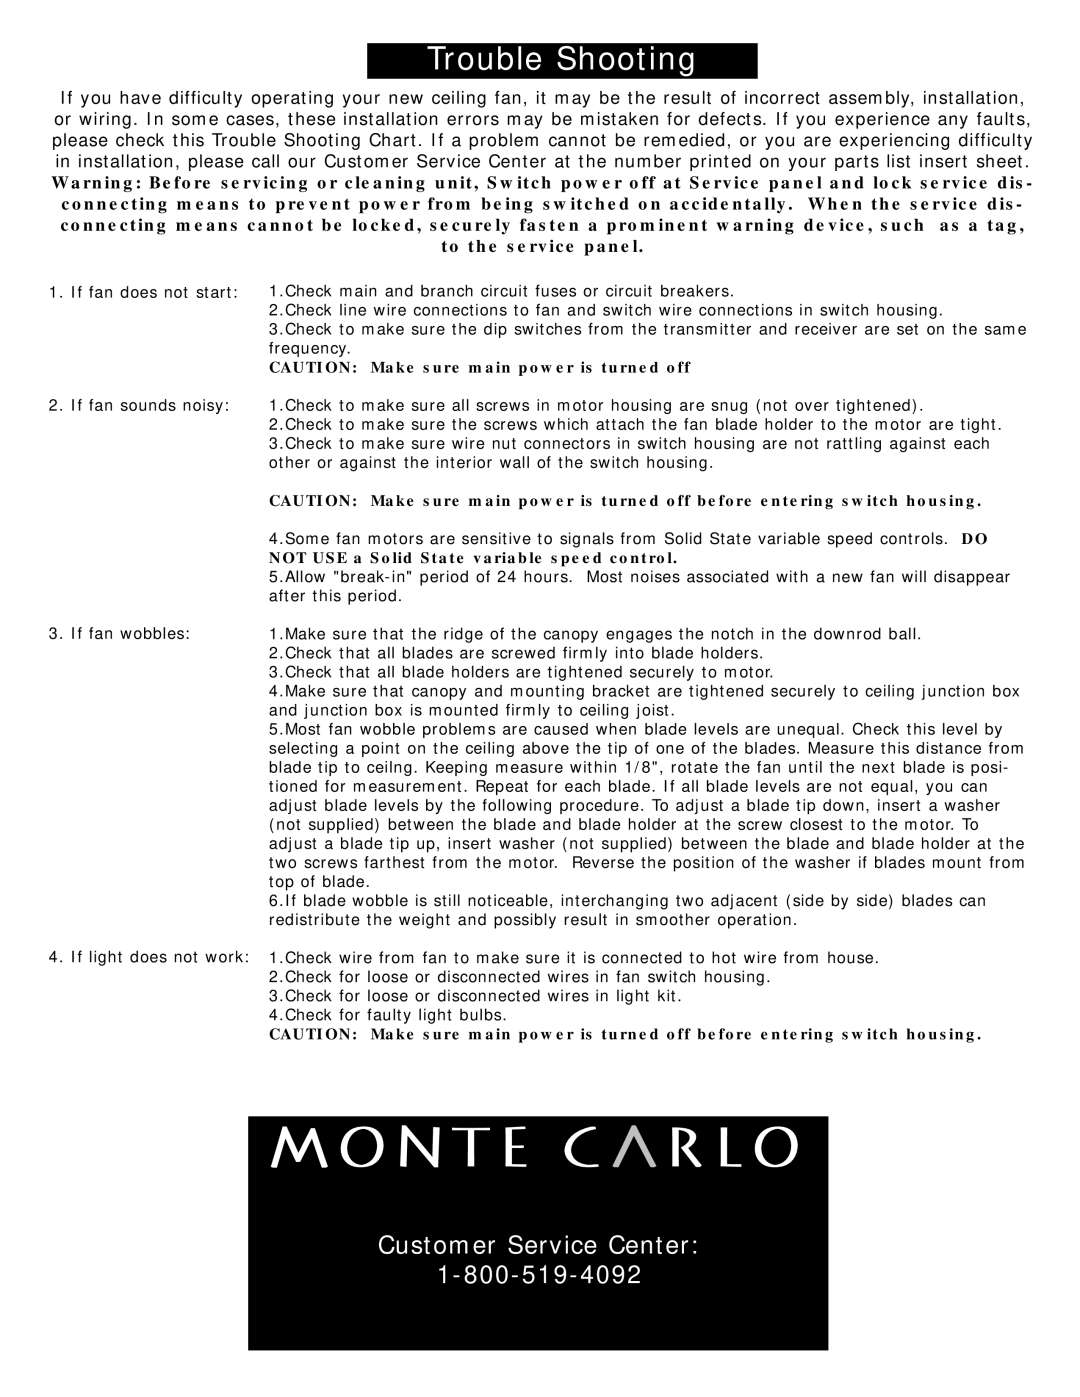 Monte Carlo Fan Company 5AYR54 Series owner manual CAUTION Make sure main power is turned off 